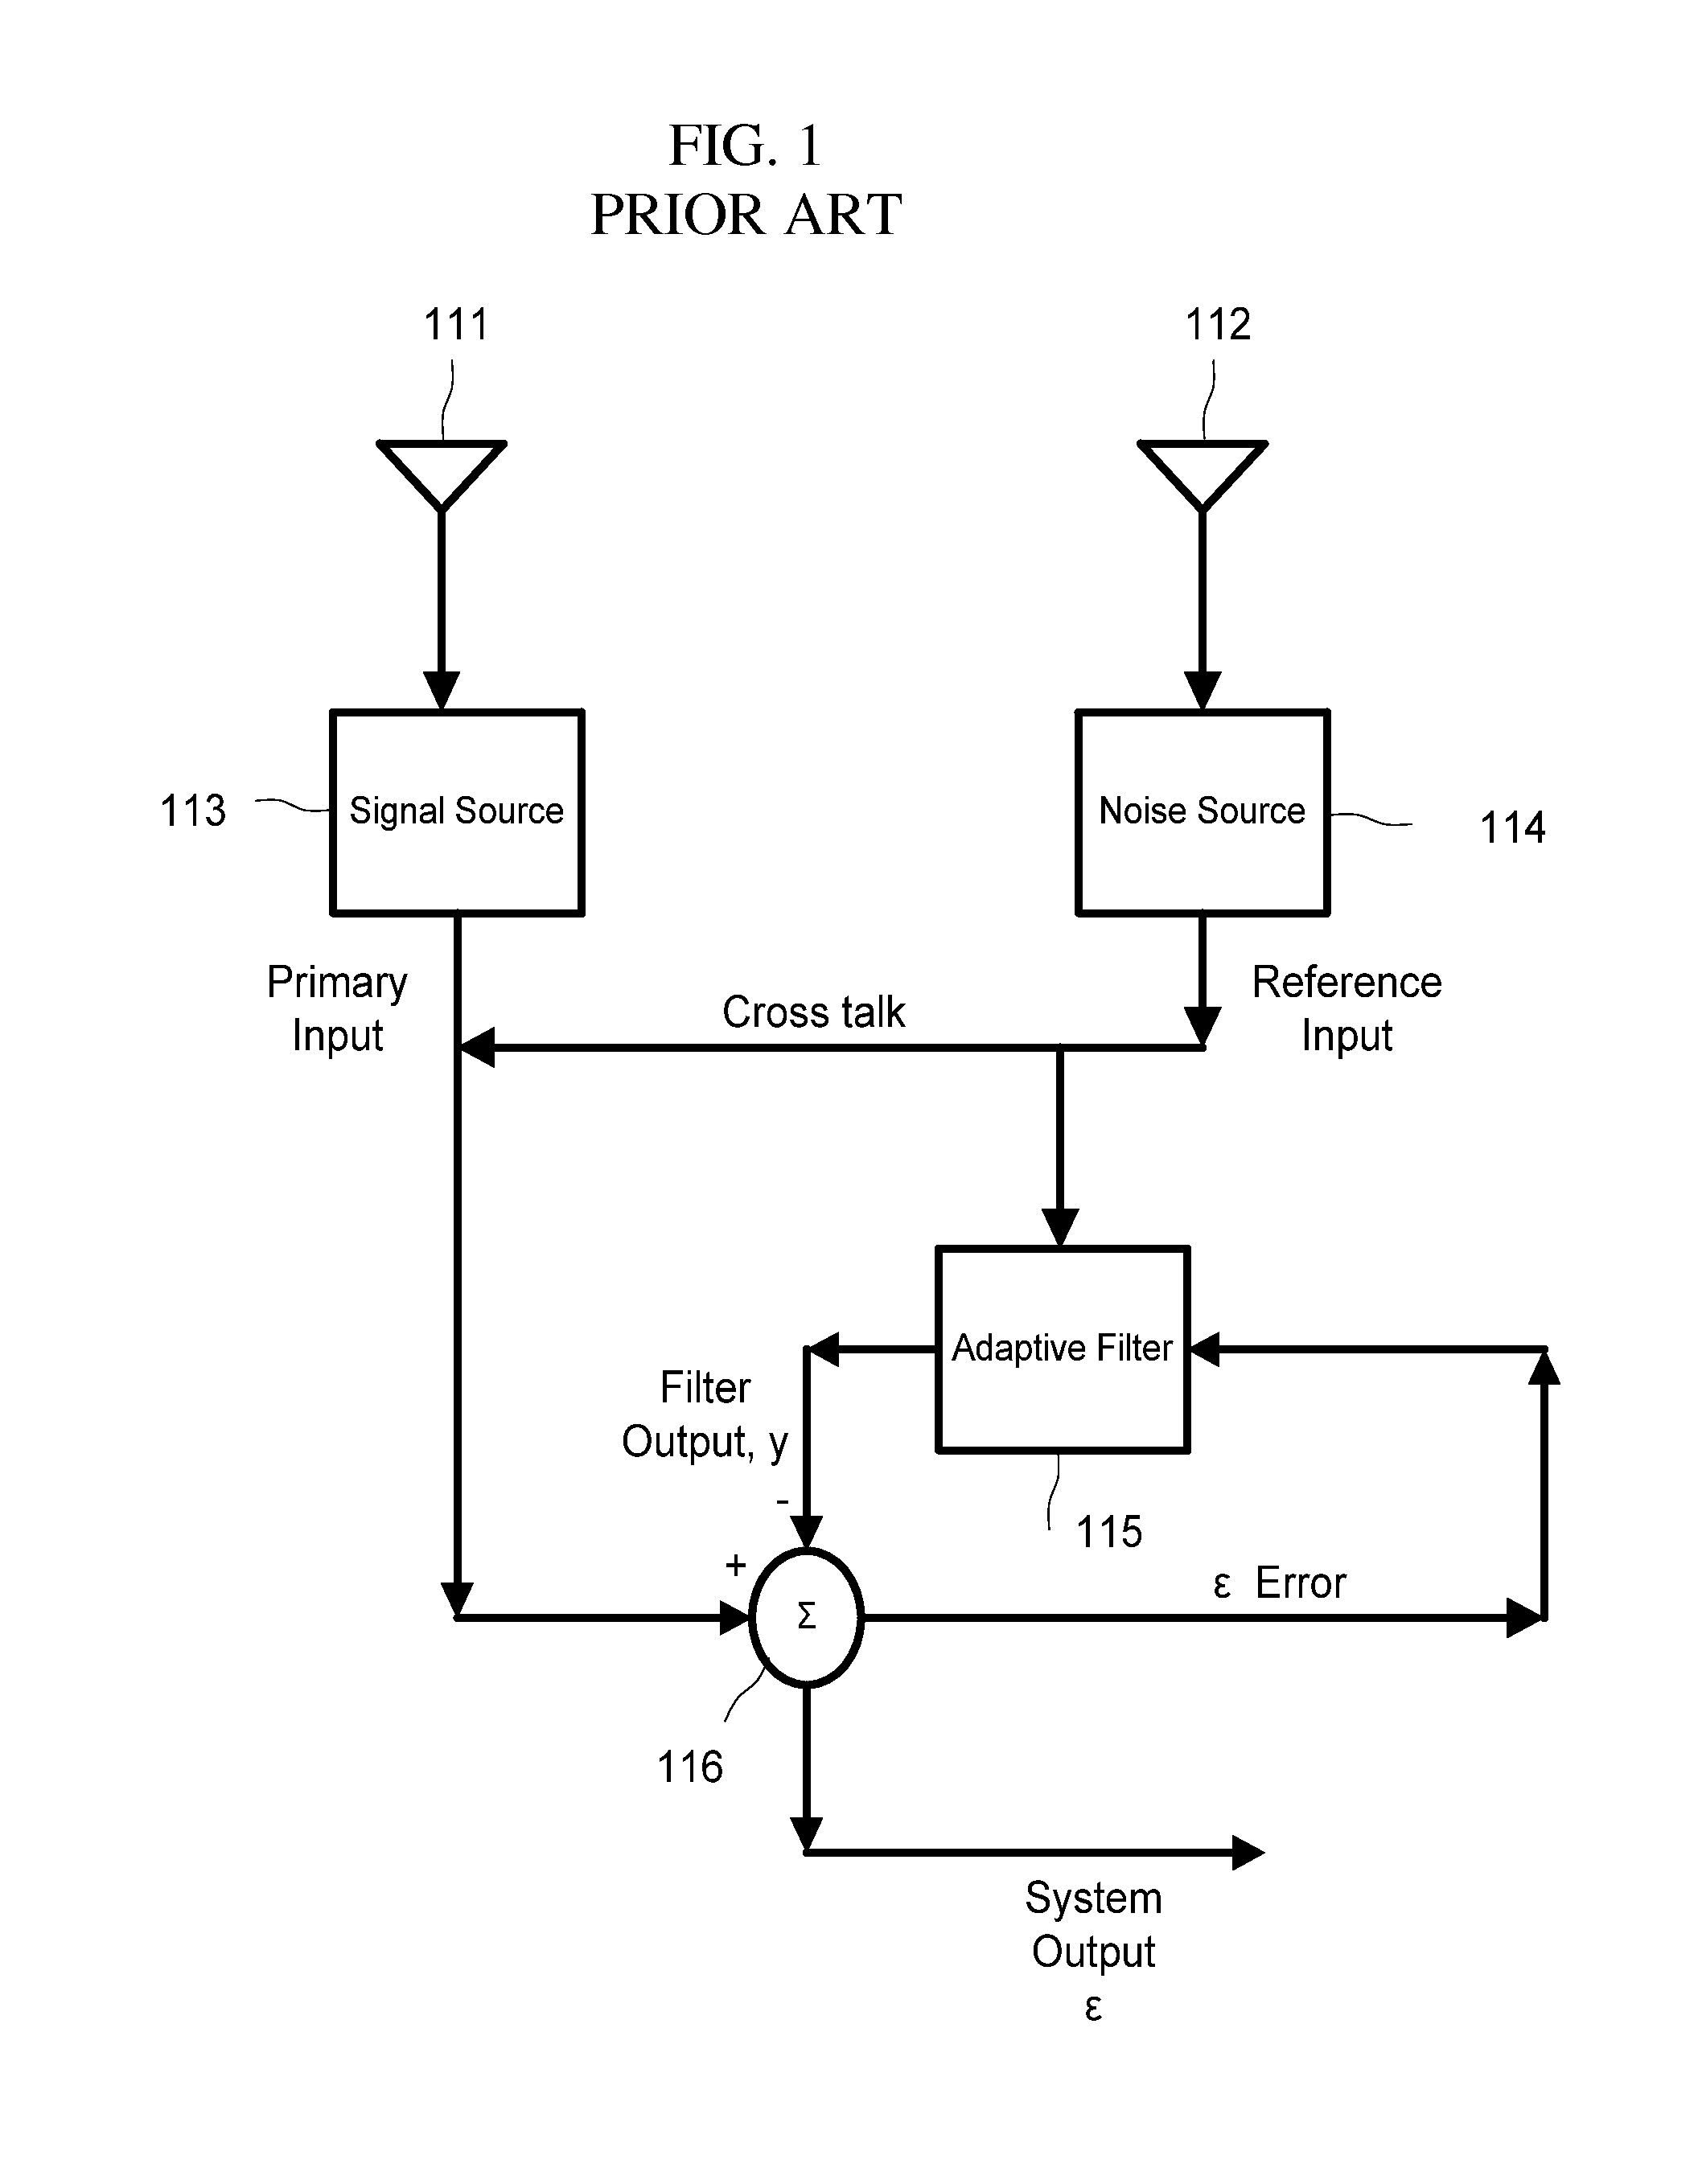 Method and device for improving audio signal quality in a voice communication system